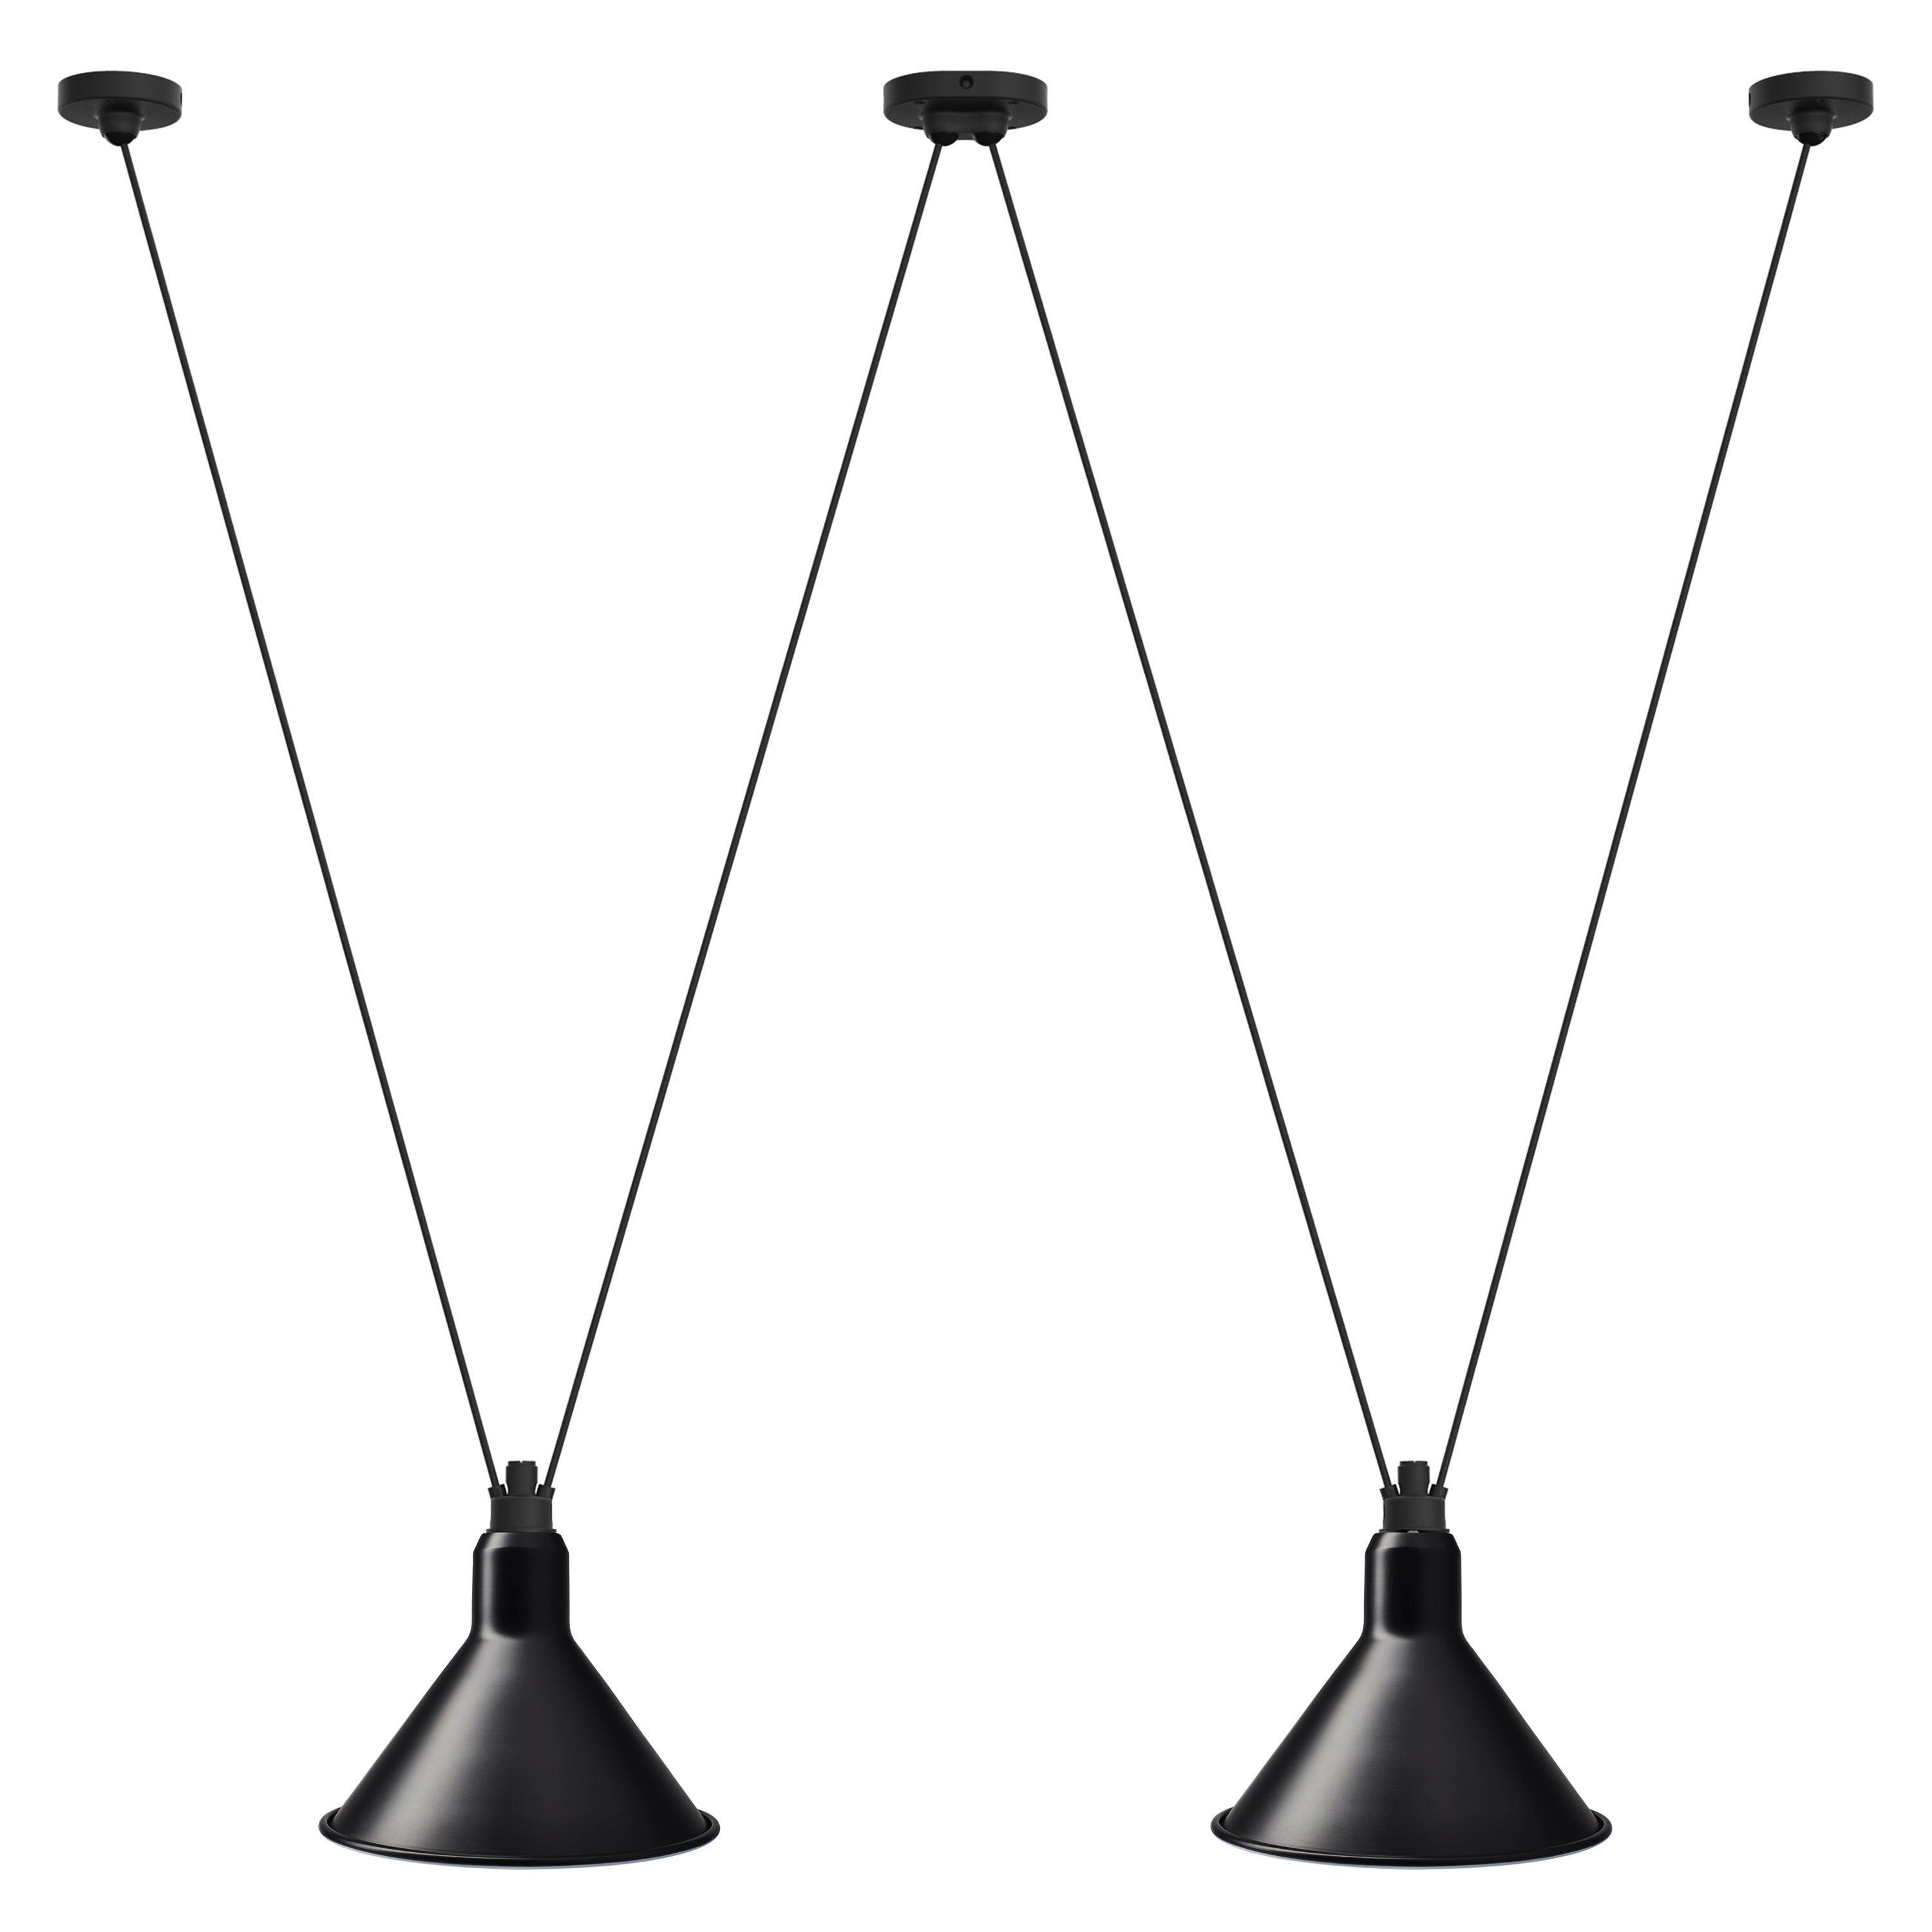 DCW Editions Les Acrobates N°324 XL Conic Pendant Lamp in Black Shade